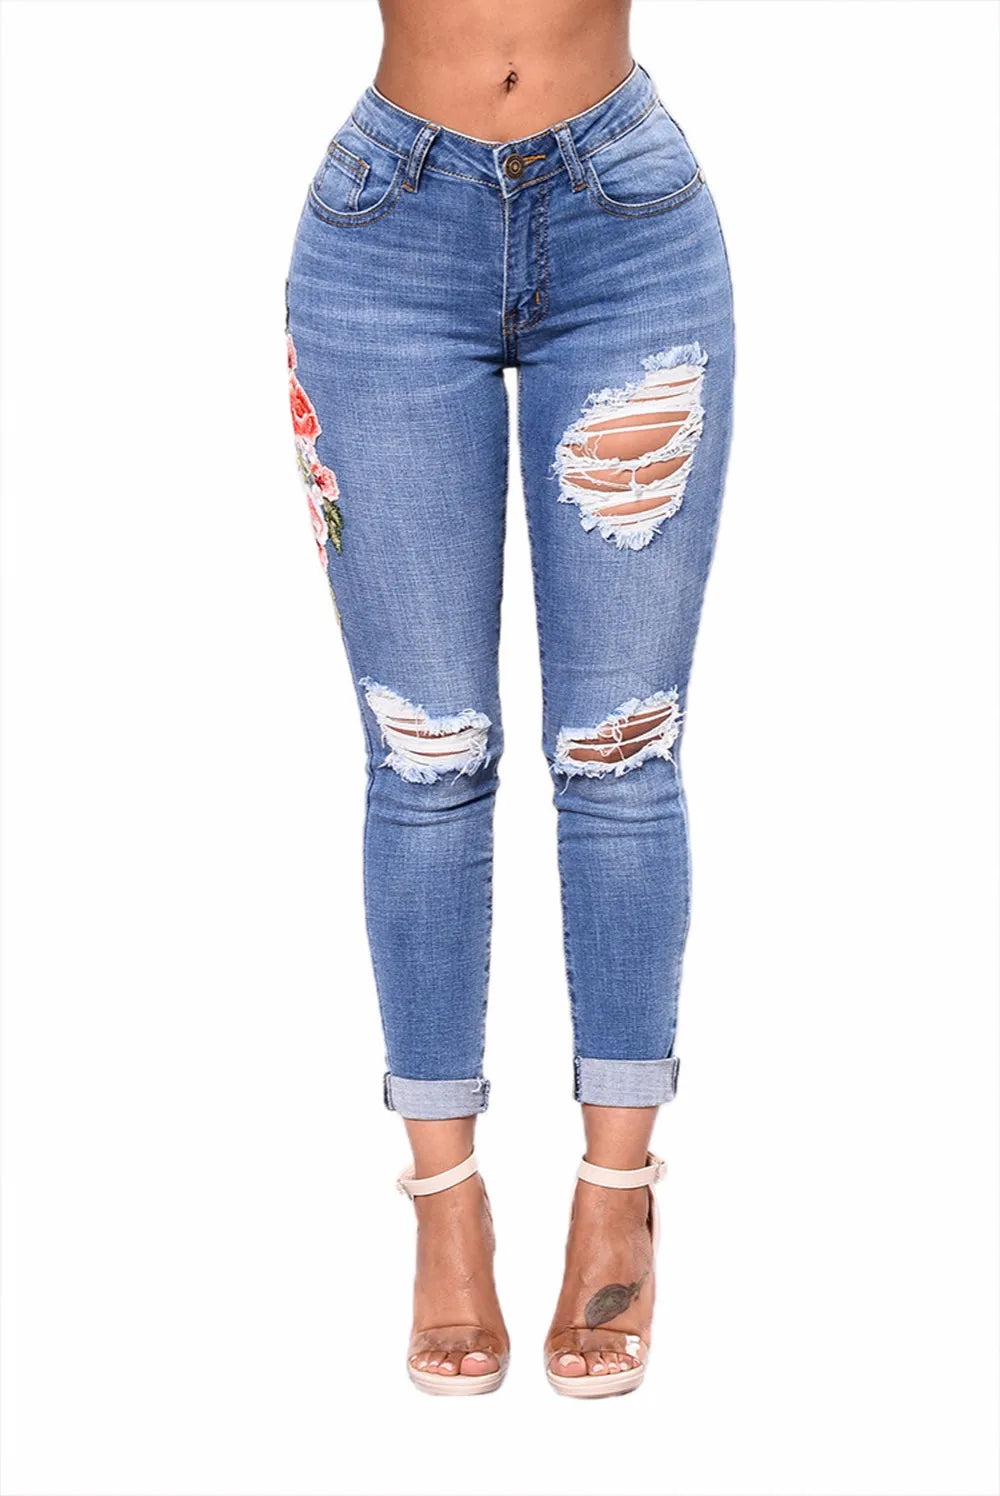 Women's Denim Jeans Pants | All For Me Today